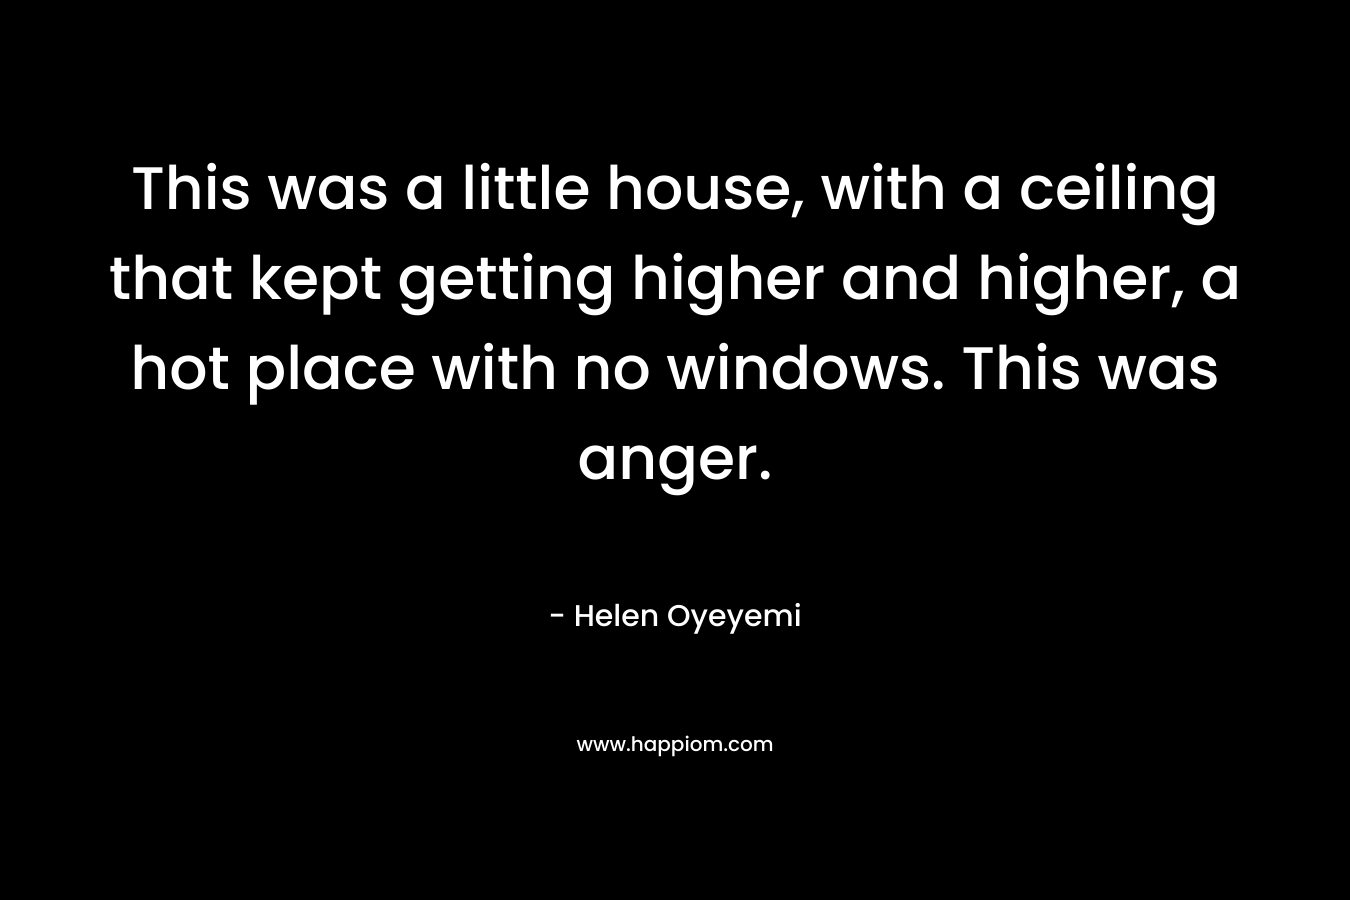 This was a little house, with a ceiling that kept getting higher and higher, a hot place with no windows. This was anger. – Helen Oyeyemi